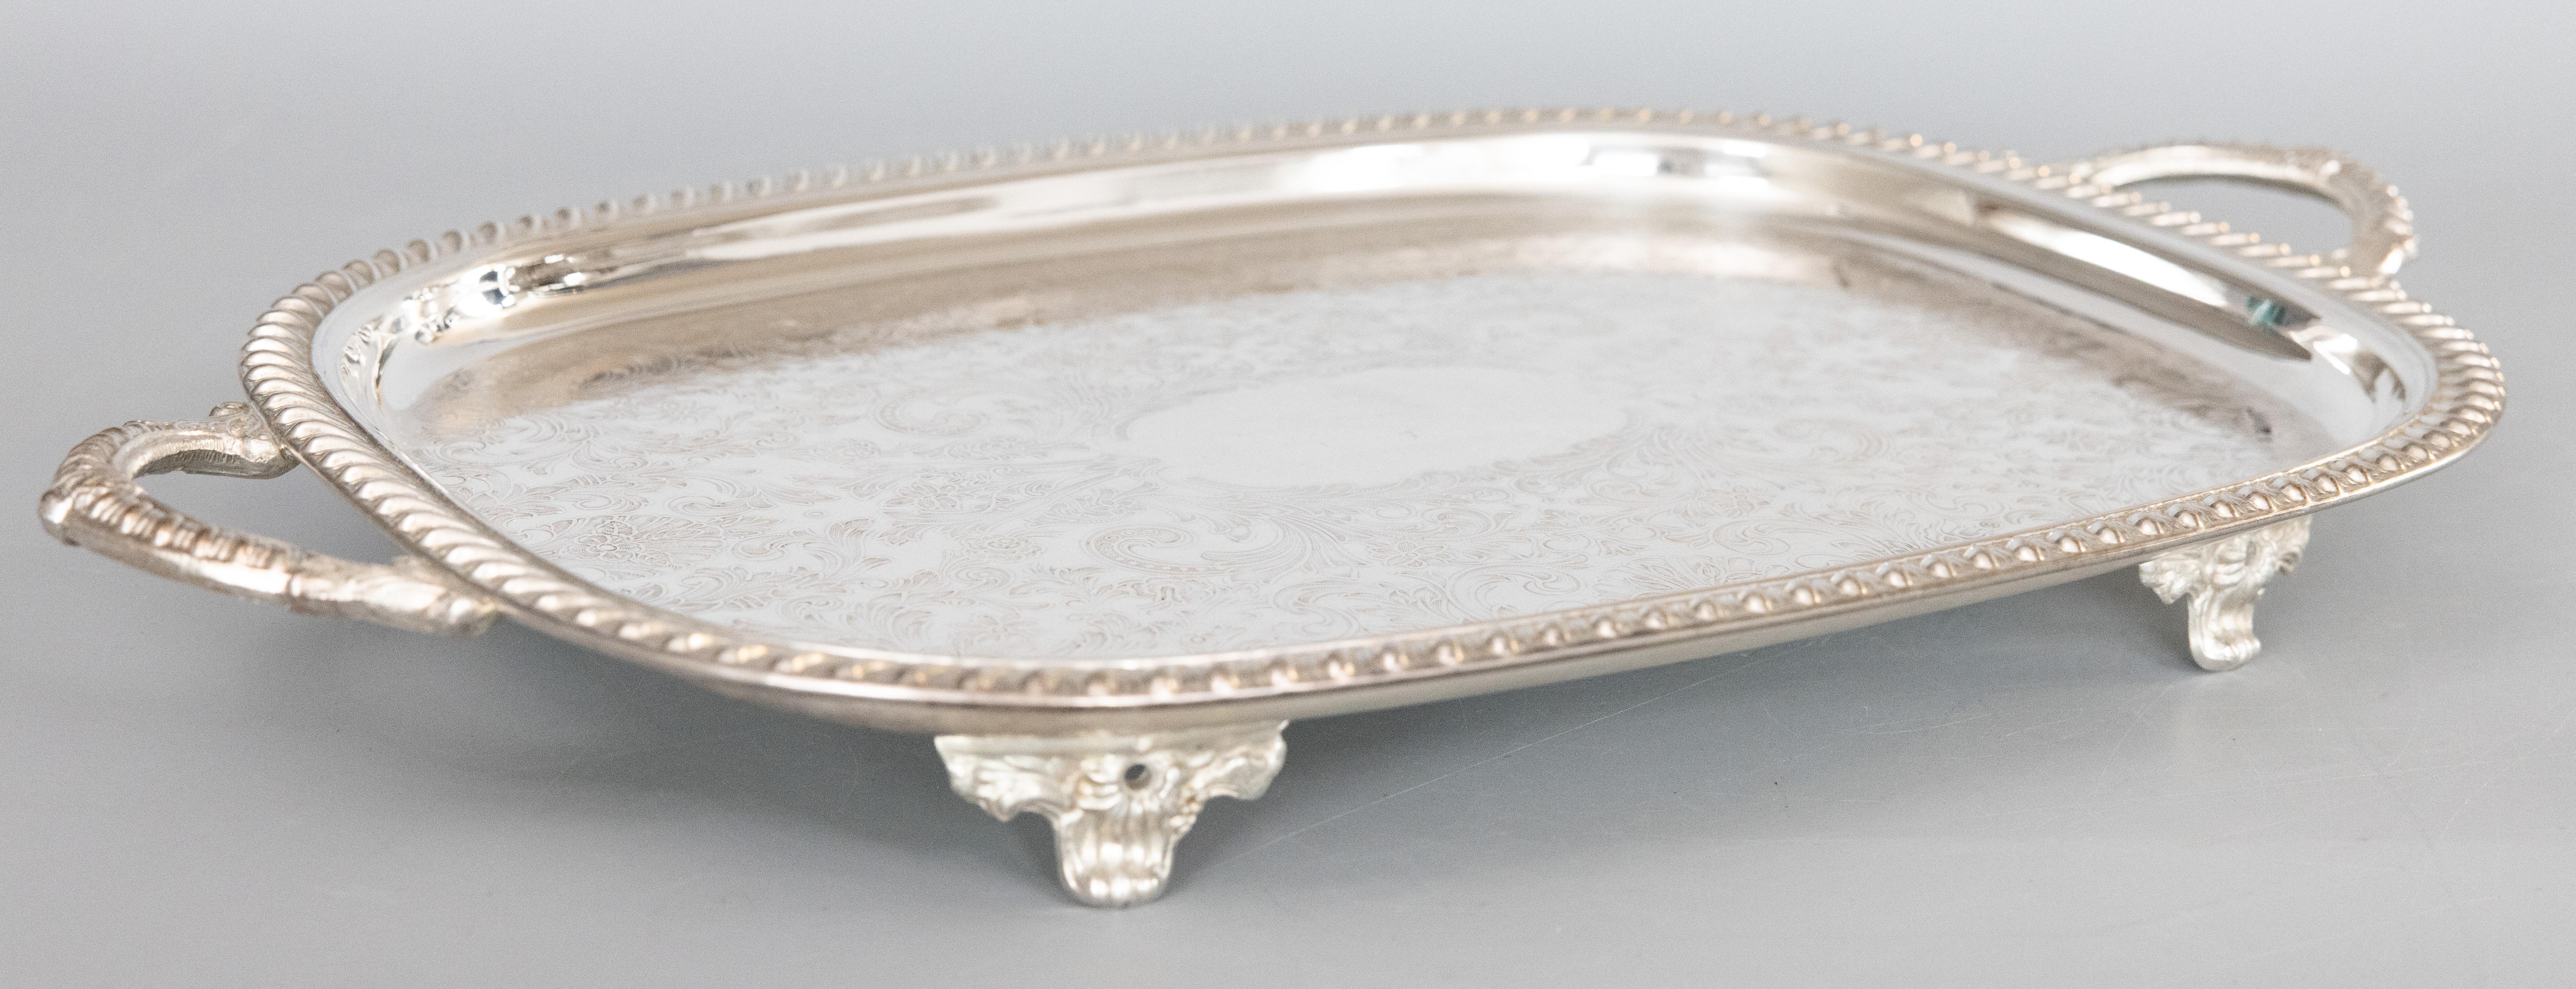 Large Vintage Silver Plate Footed Tray With Handles, circa 1950 For Sale 2